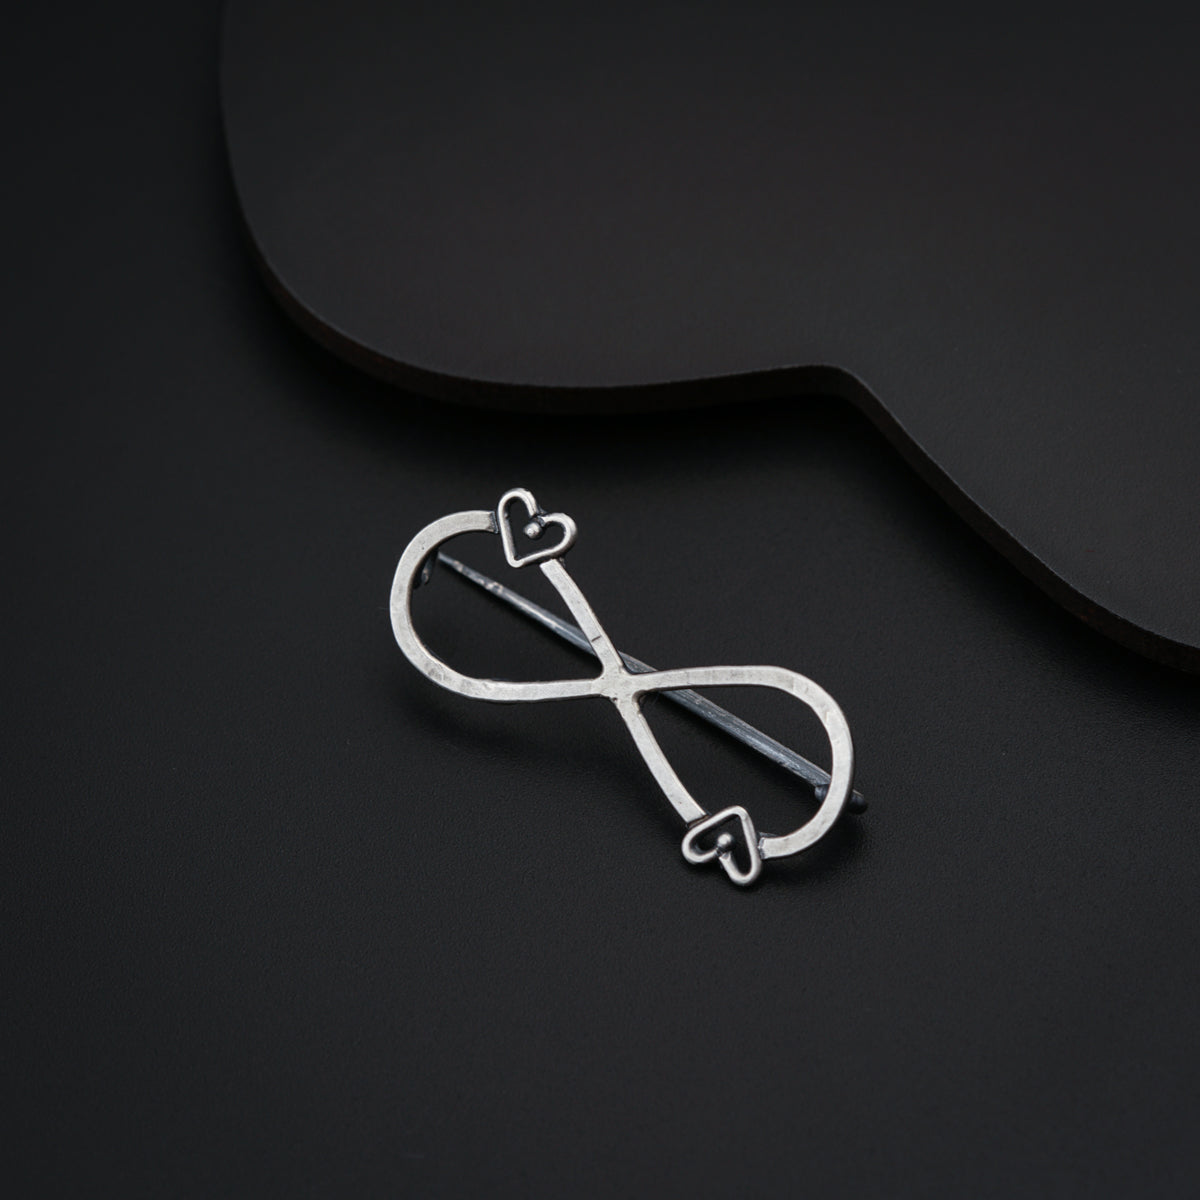 a pair of scissors sitting on top of a black table